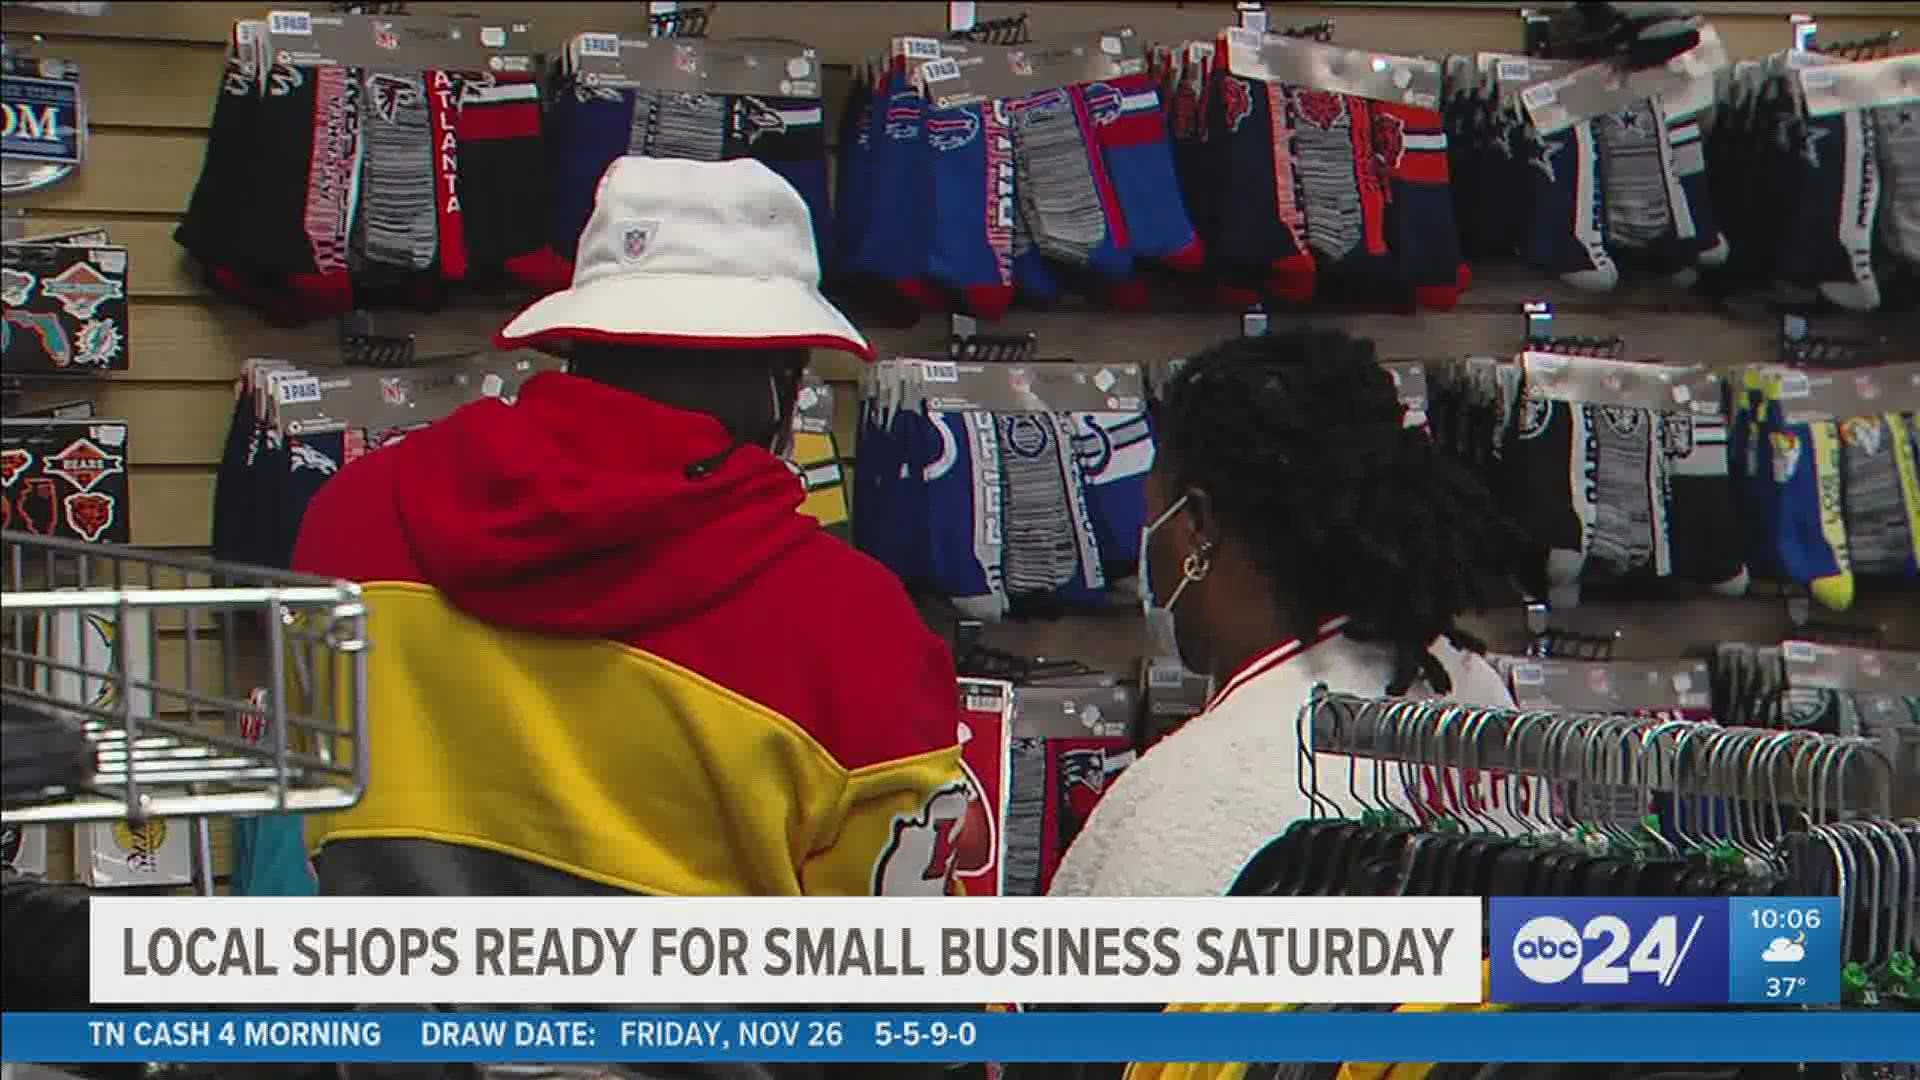 Owners at Memphis area small businesses purchased inventory earlier than ever with overseas delivery uncertainty, and they report strong November sales.